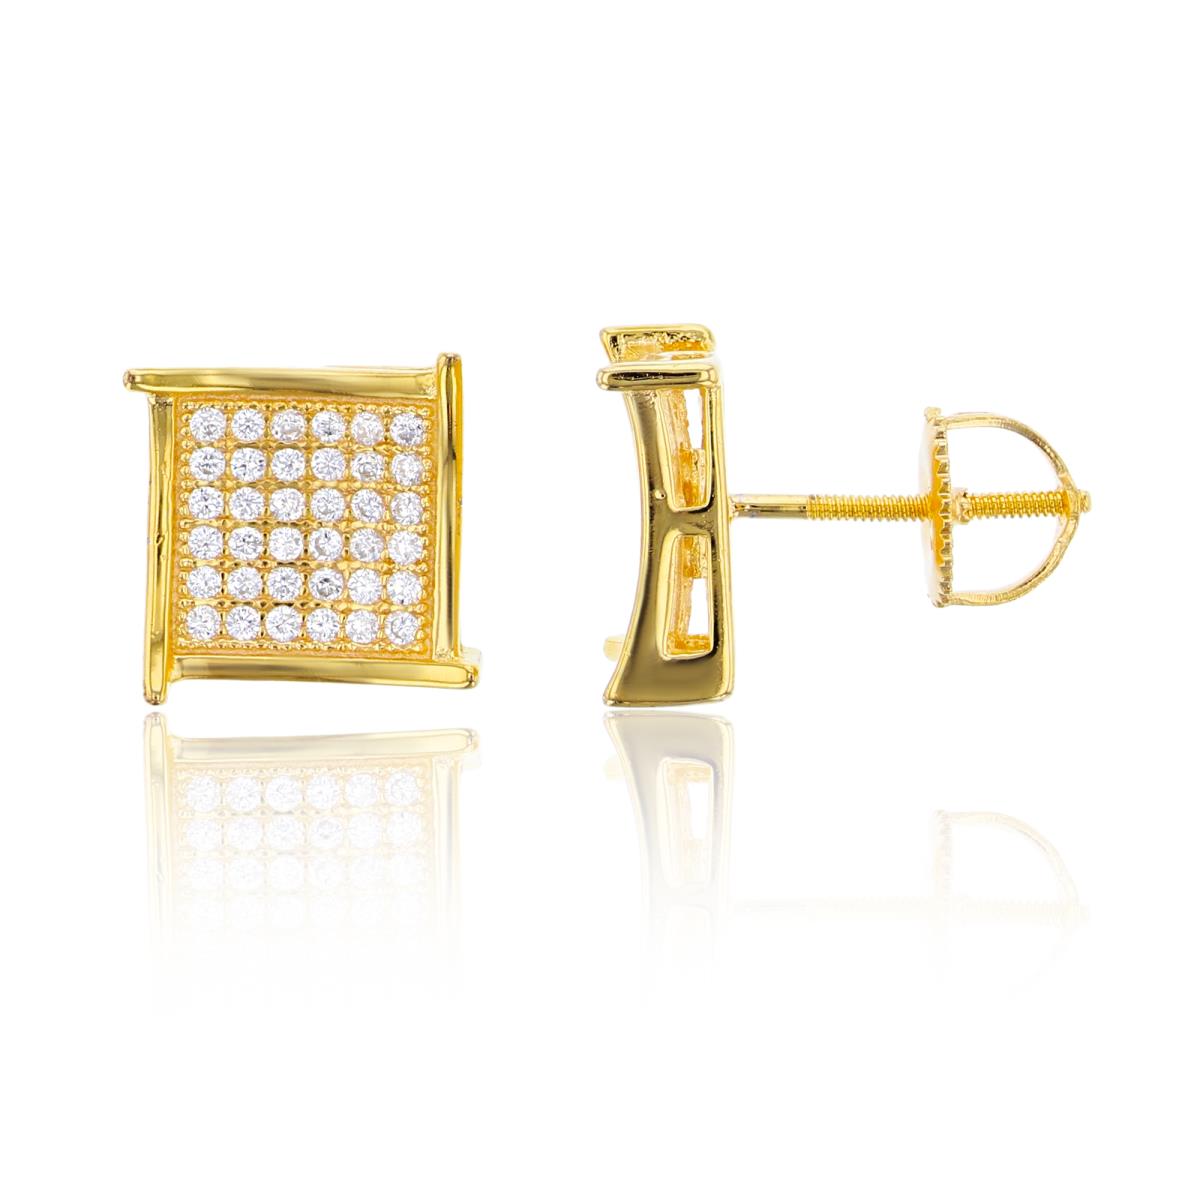 Sterling Silver Yellow 10x10mm Fancy Square Micropave Screwback Stud Earring